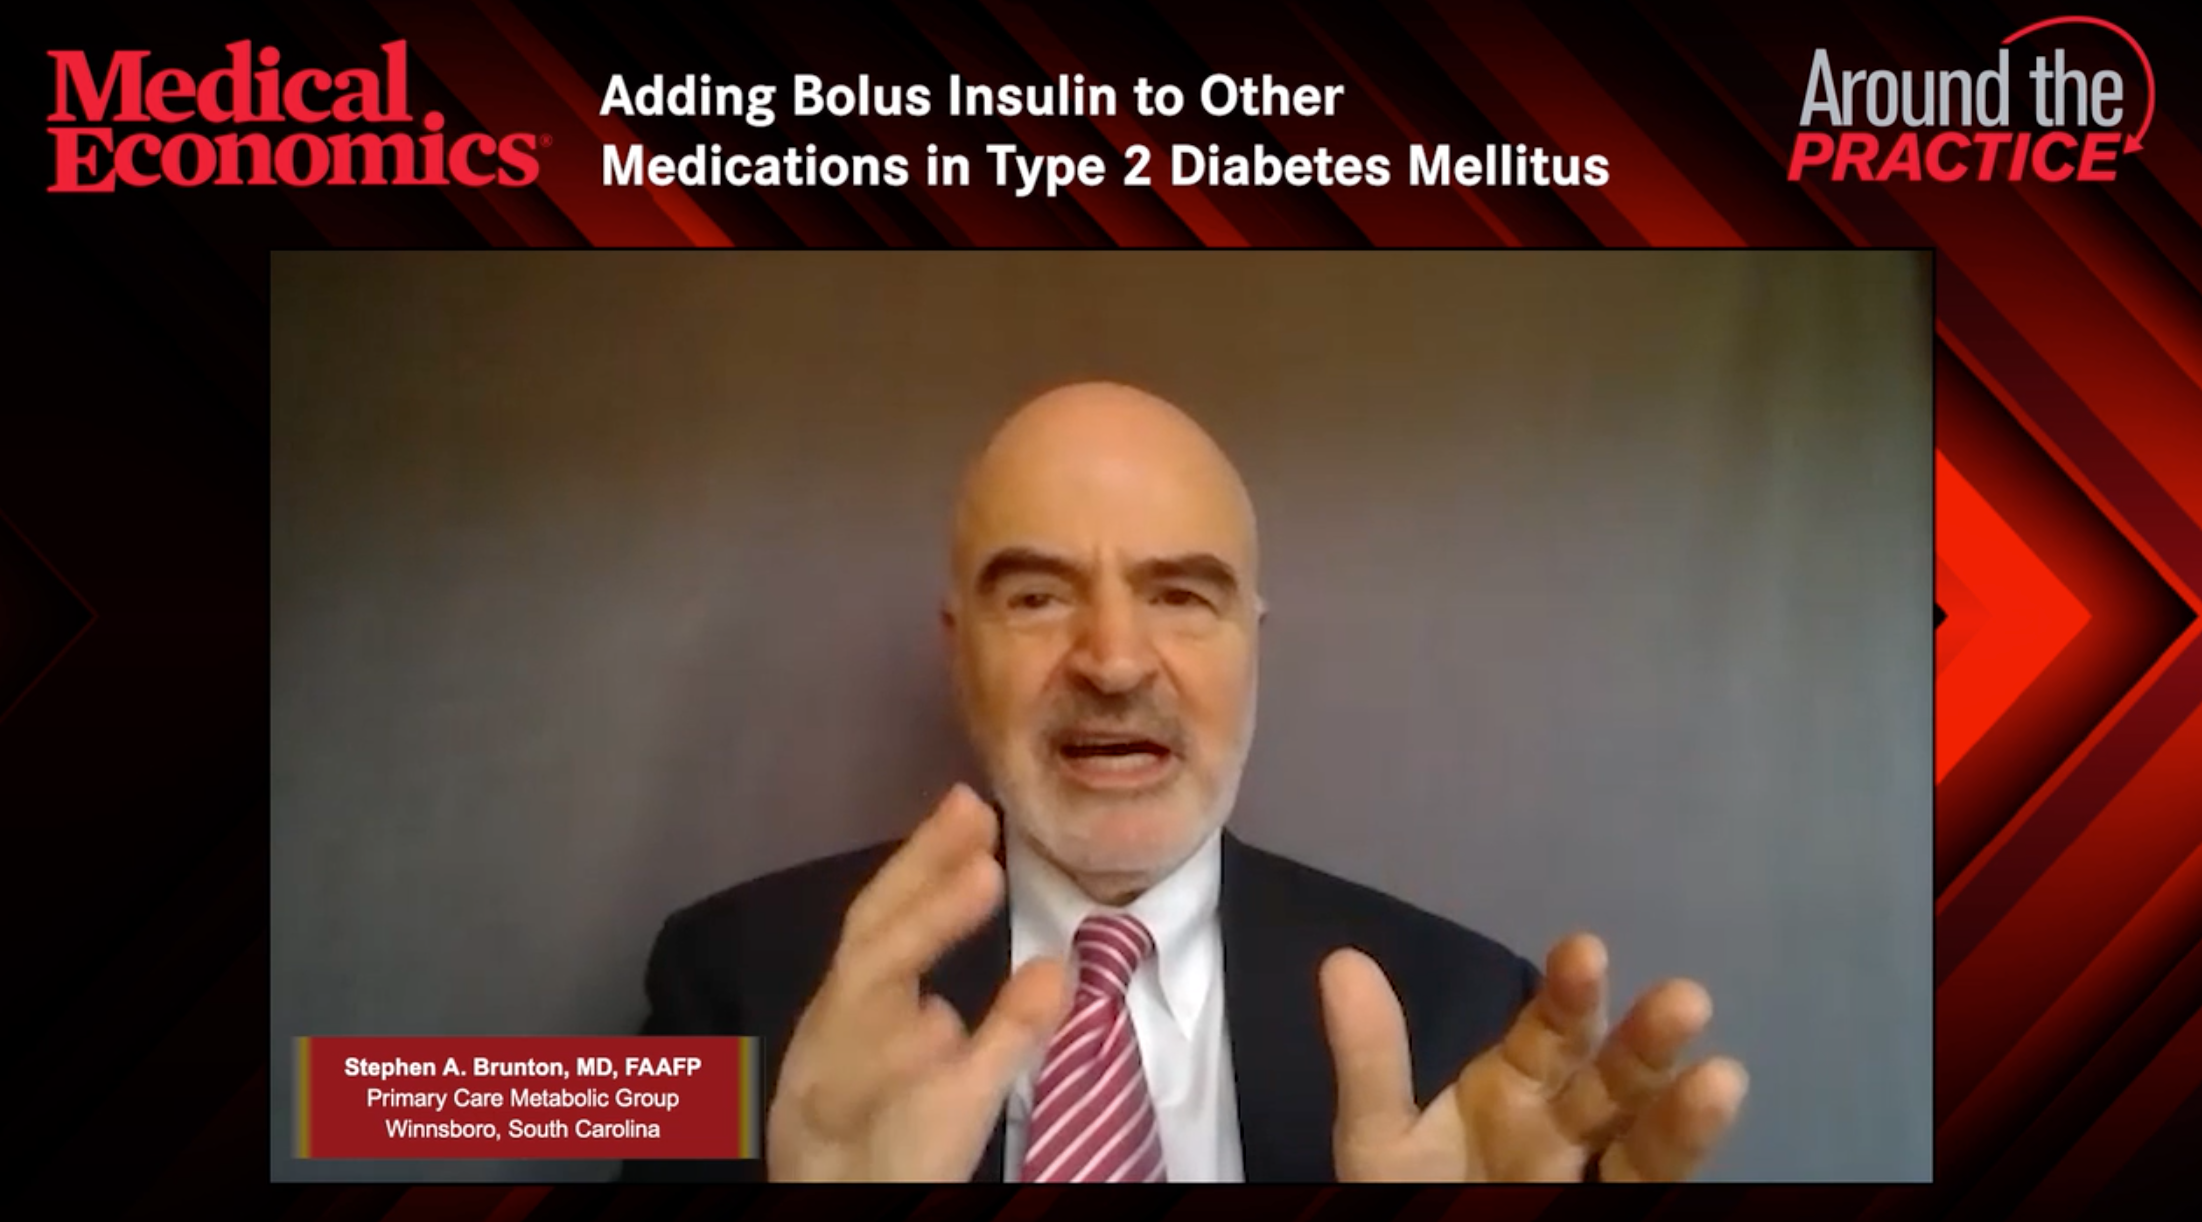 Adding Bolus Insulin to other medications in Type 2 Diabetes Mellitus